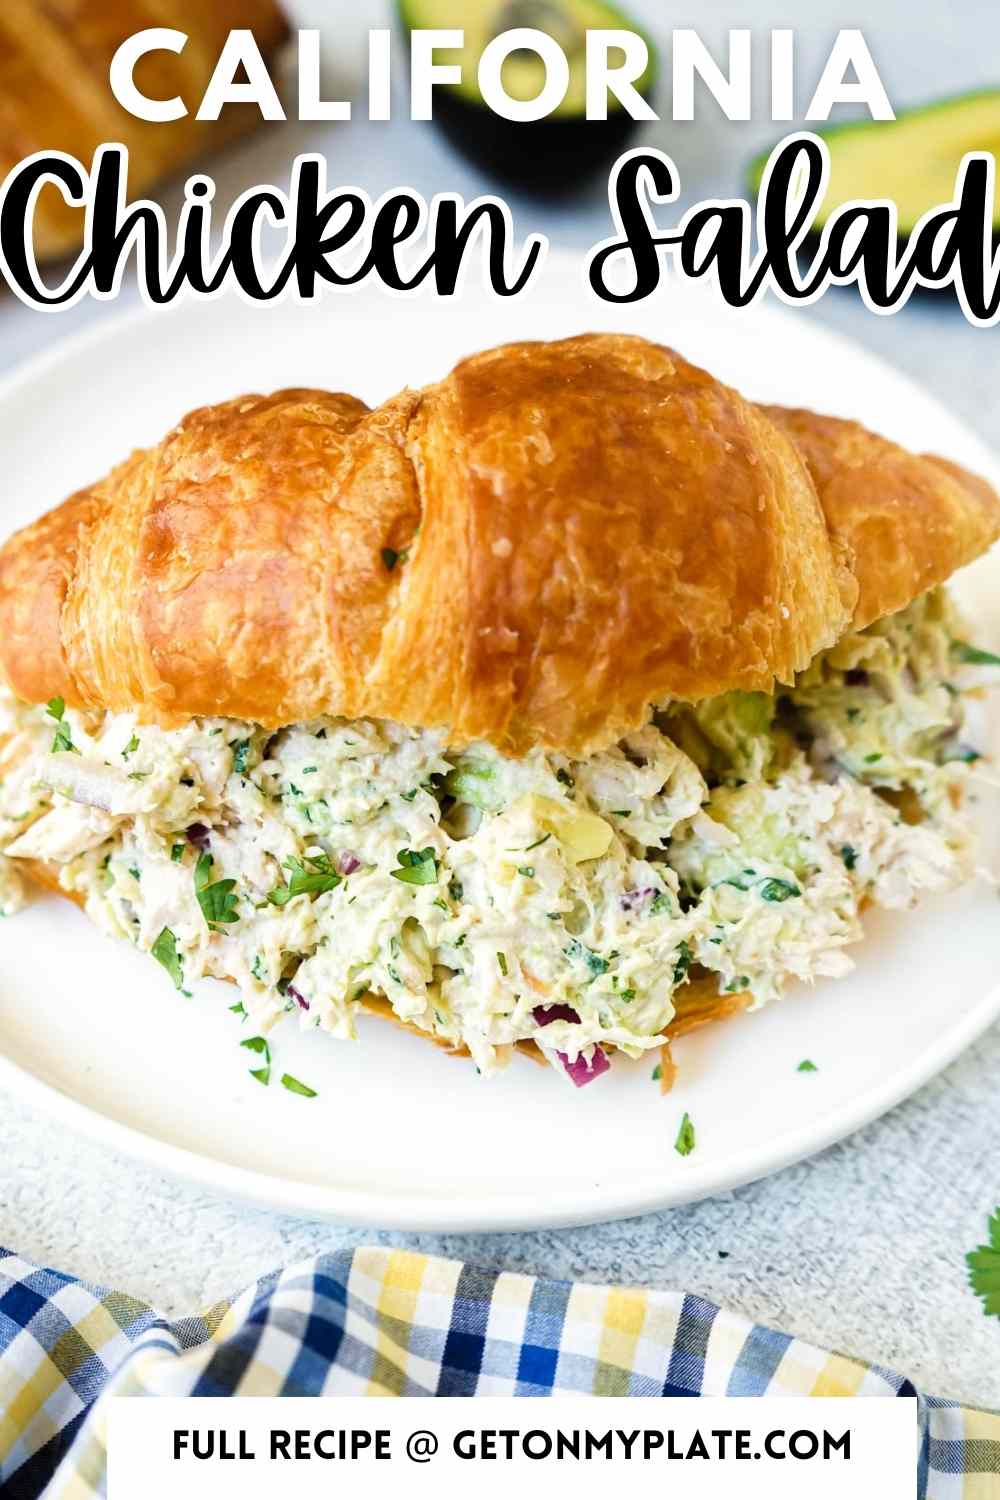 Pinterest Pin for California Chicken Salad with Avocado.